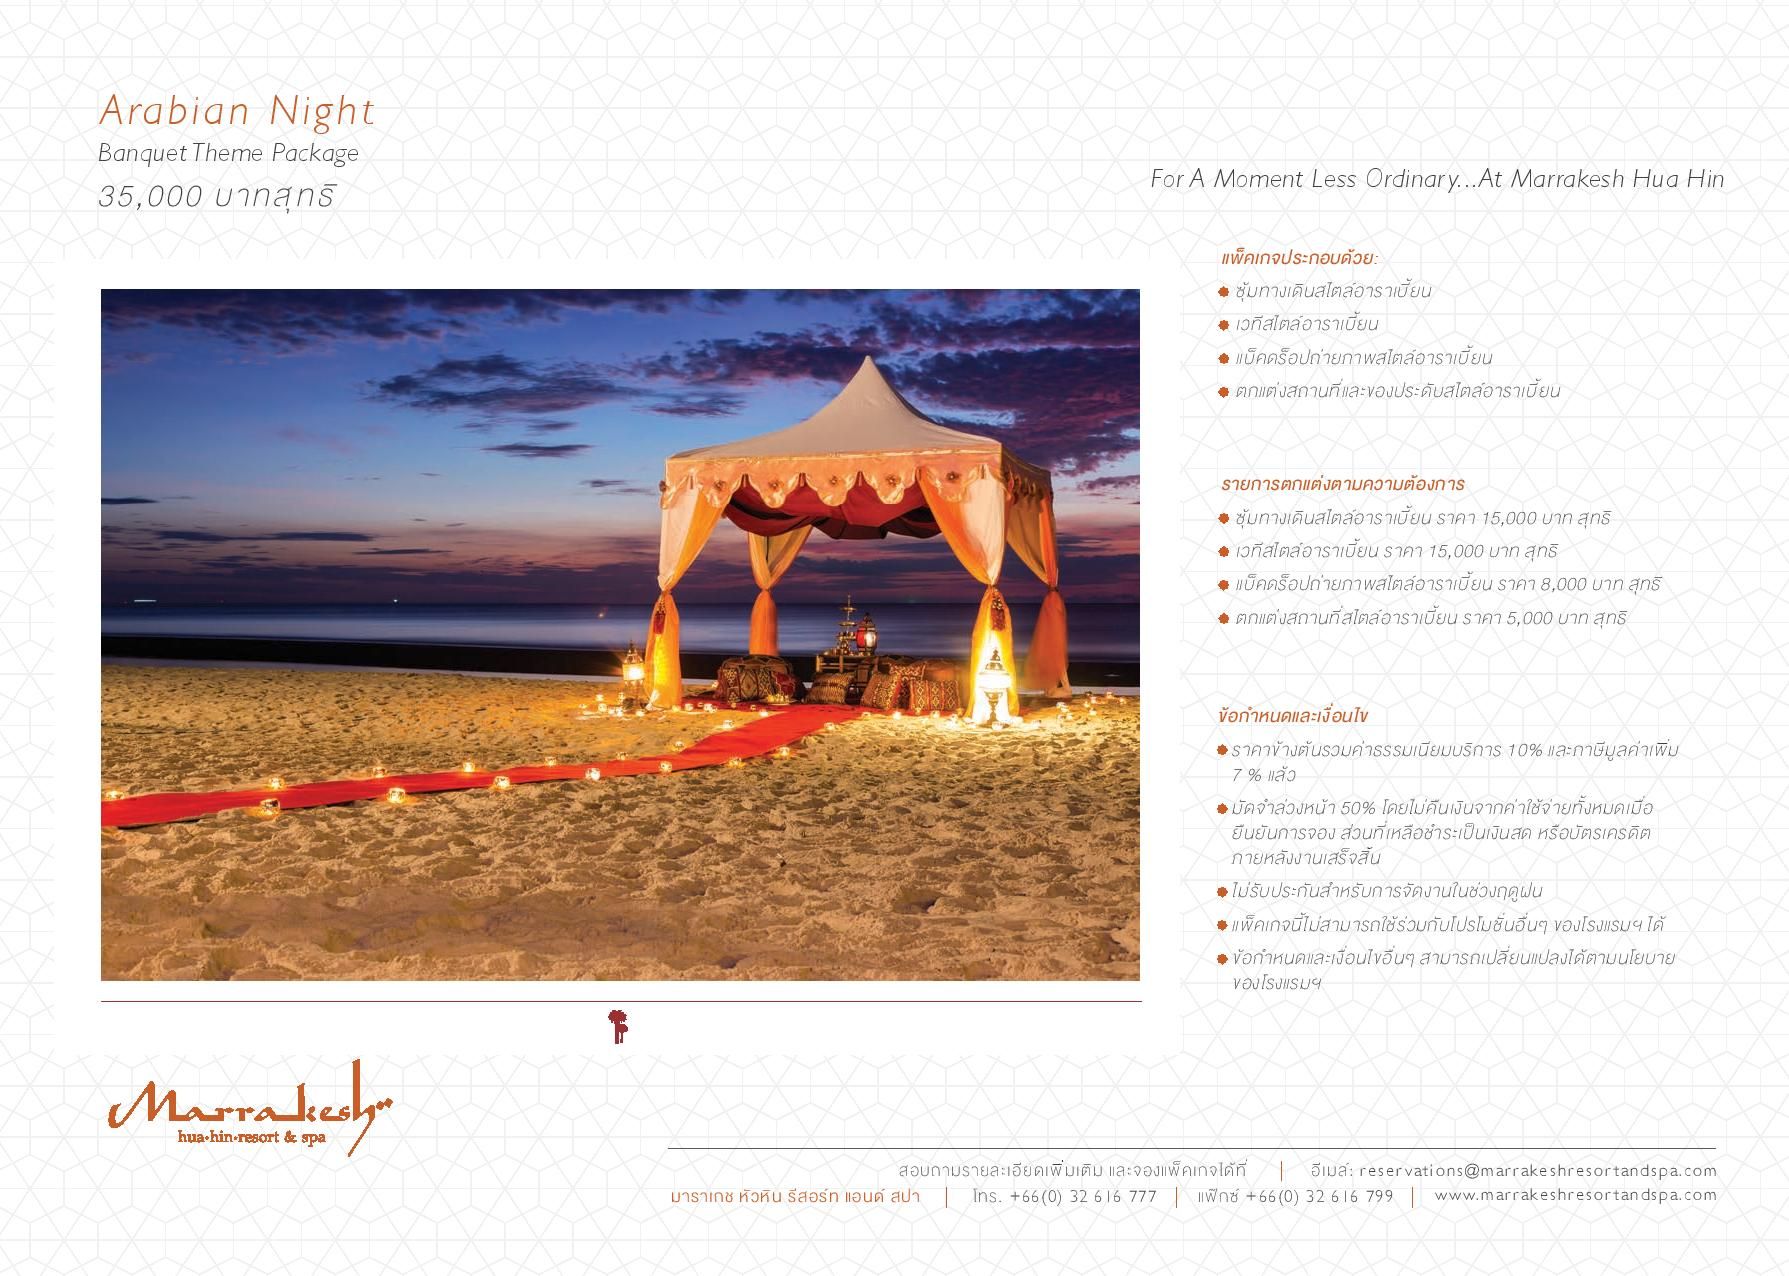 Arabian Night Banquet Theme Package 2016 page 002